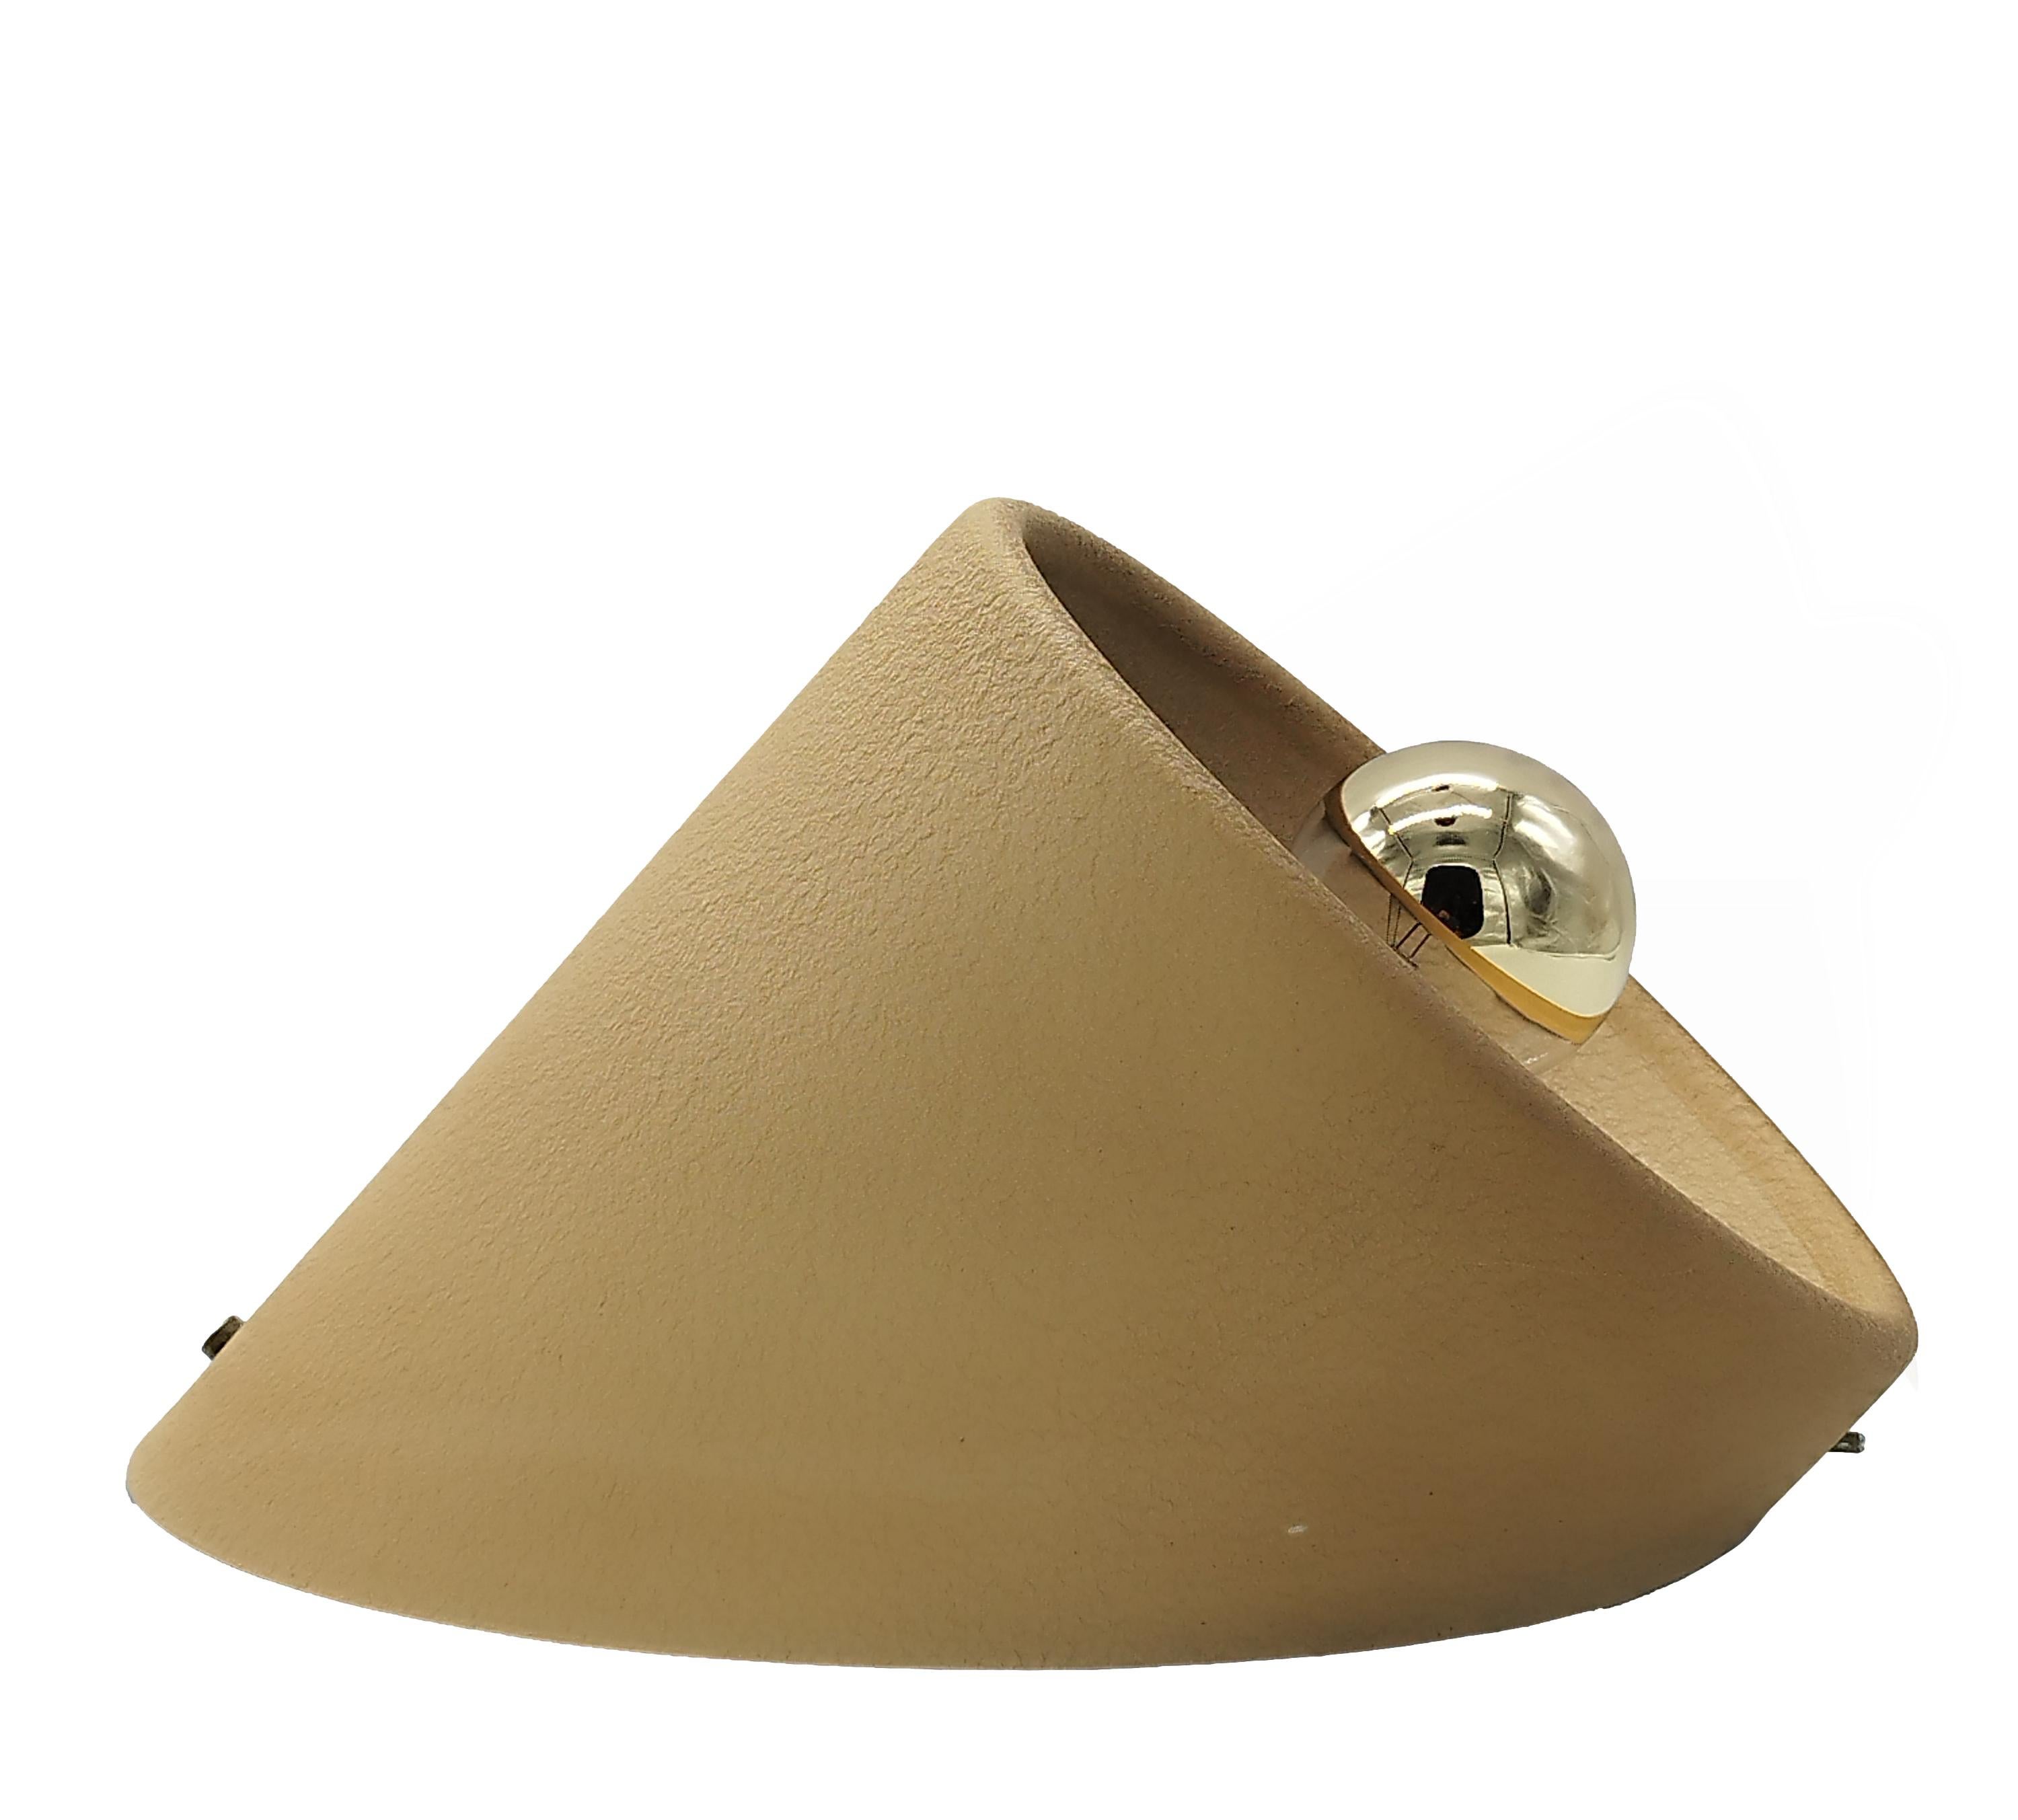 An ivory and cracquele' lacquered aluminium wall light, it can be mounted downwards or as an upward light.